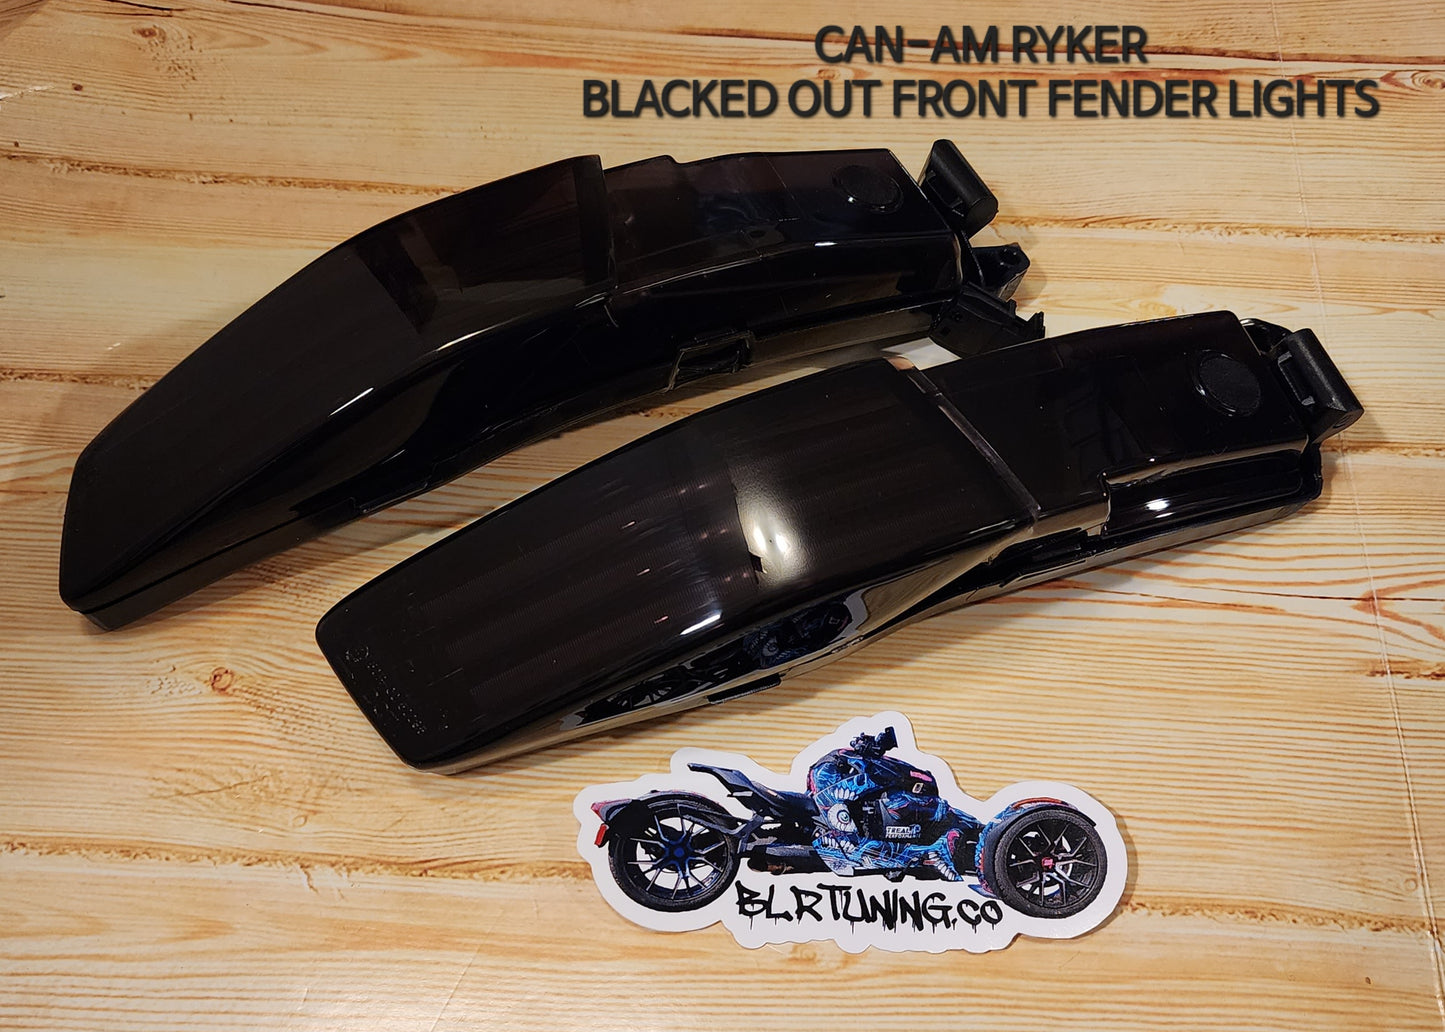 BLACKED OUT RYKER Front Fender Lights Fits All Years Fits All Models Plug And Play